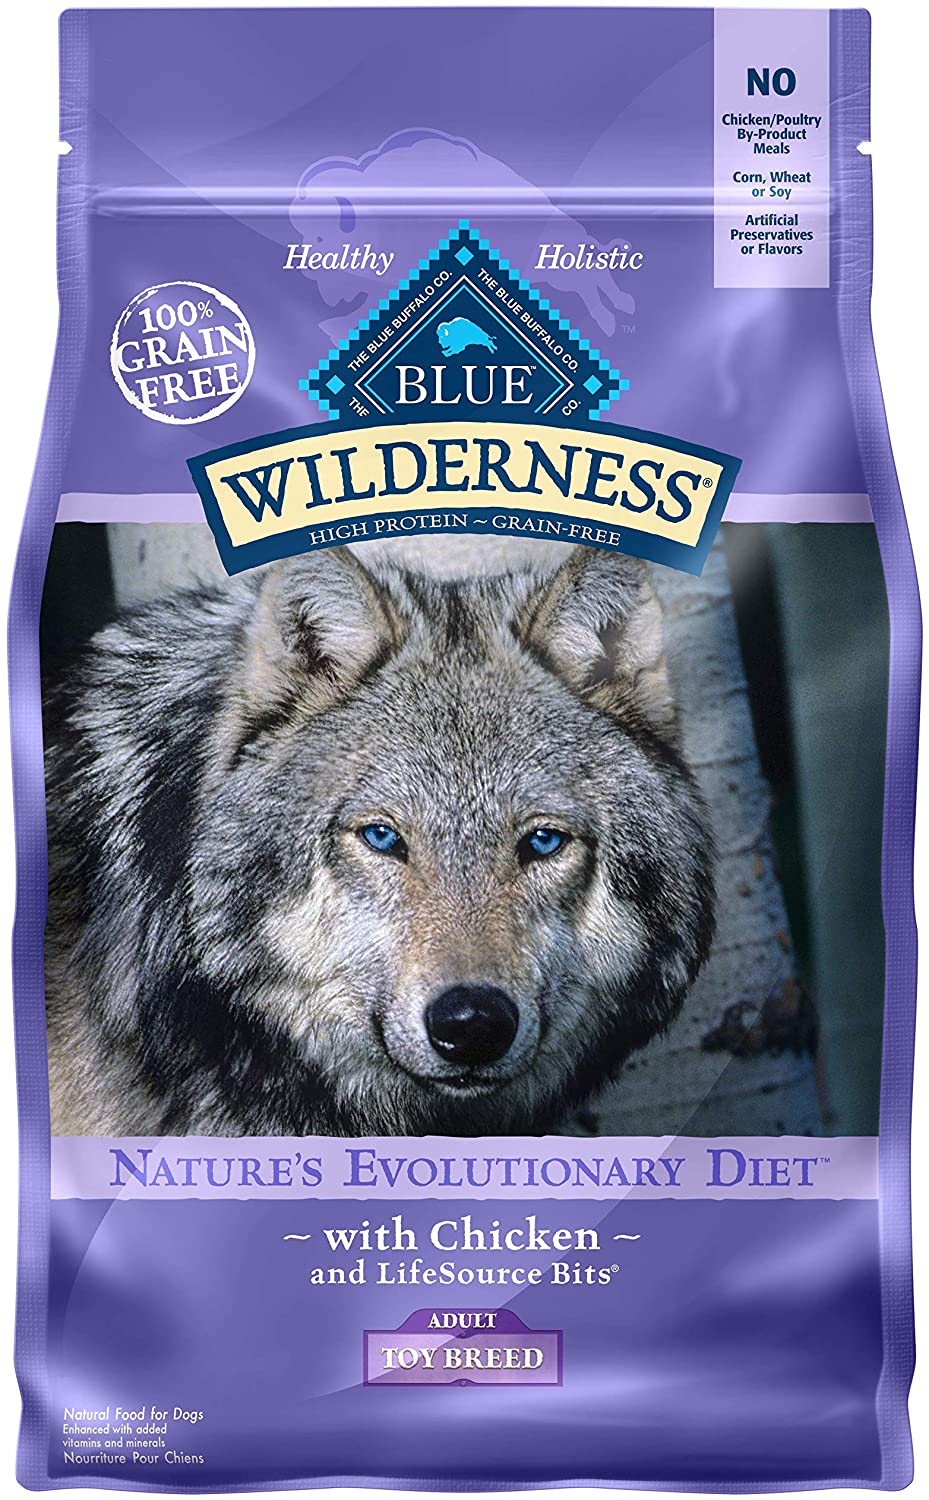 BLUE Wilderness High Protein Grain-Free Adult Dry Dog Food